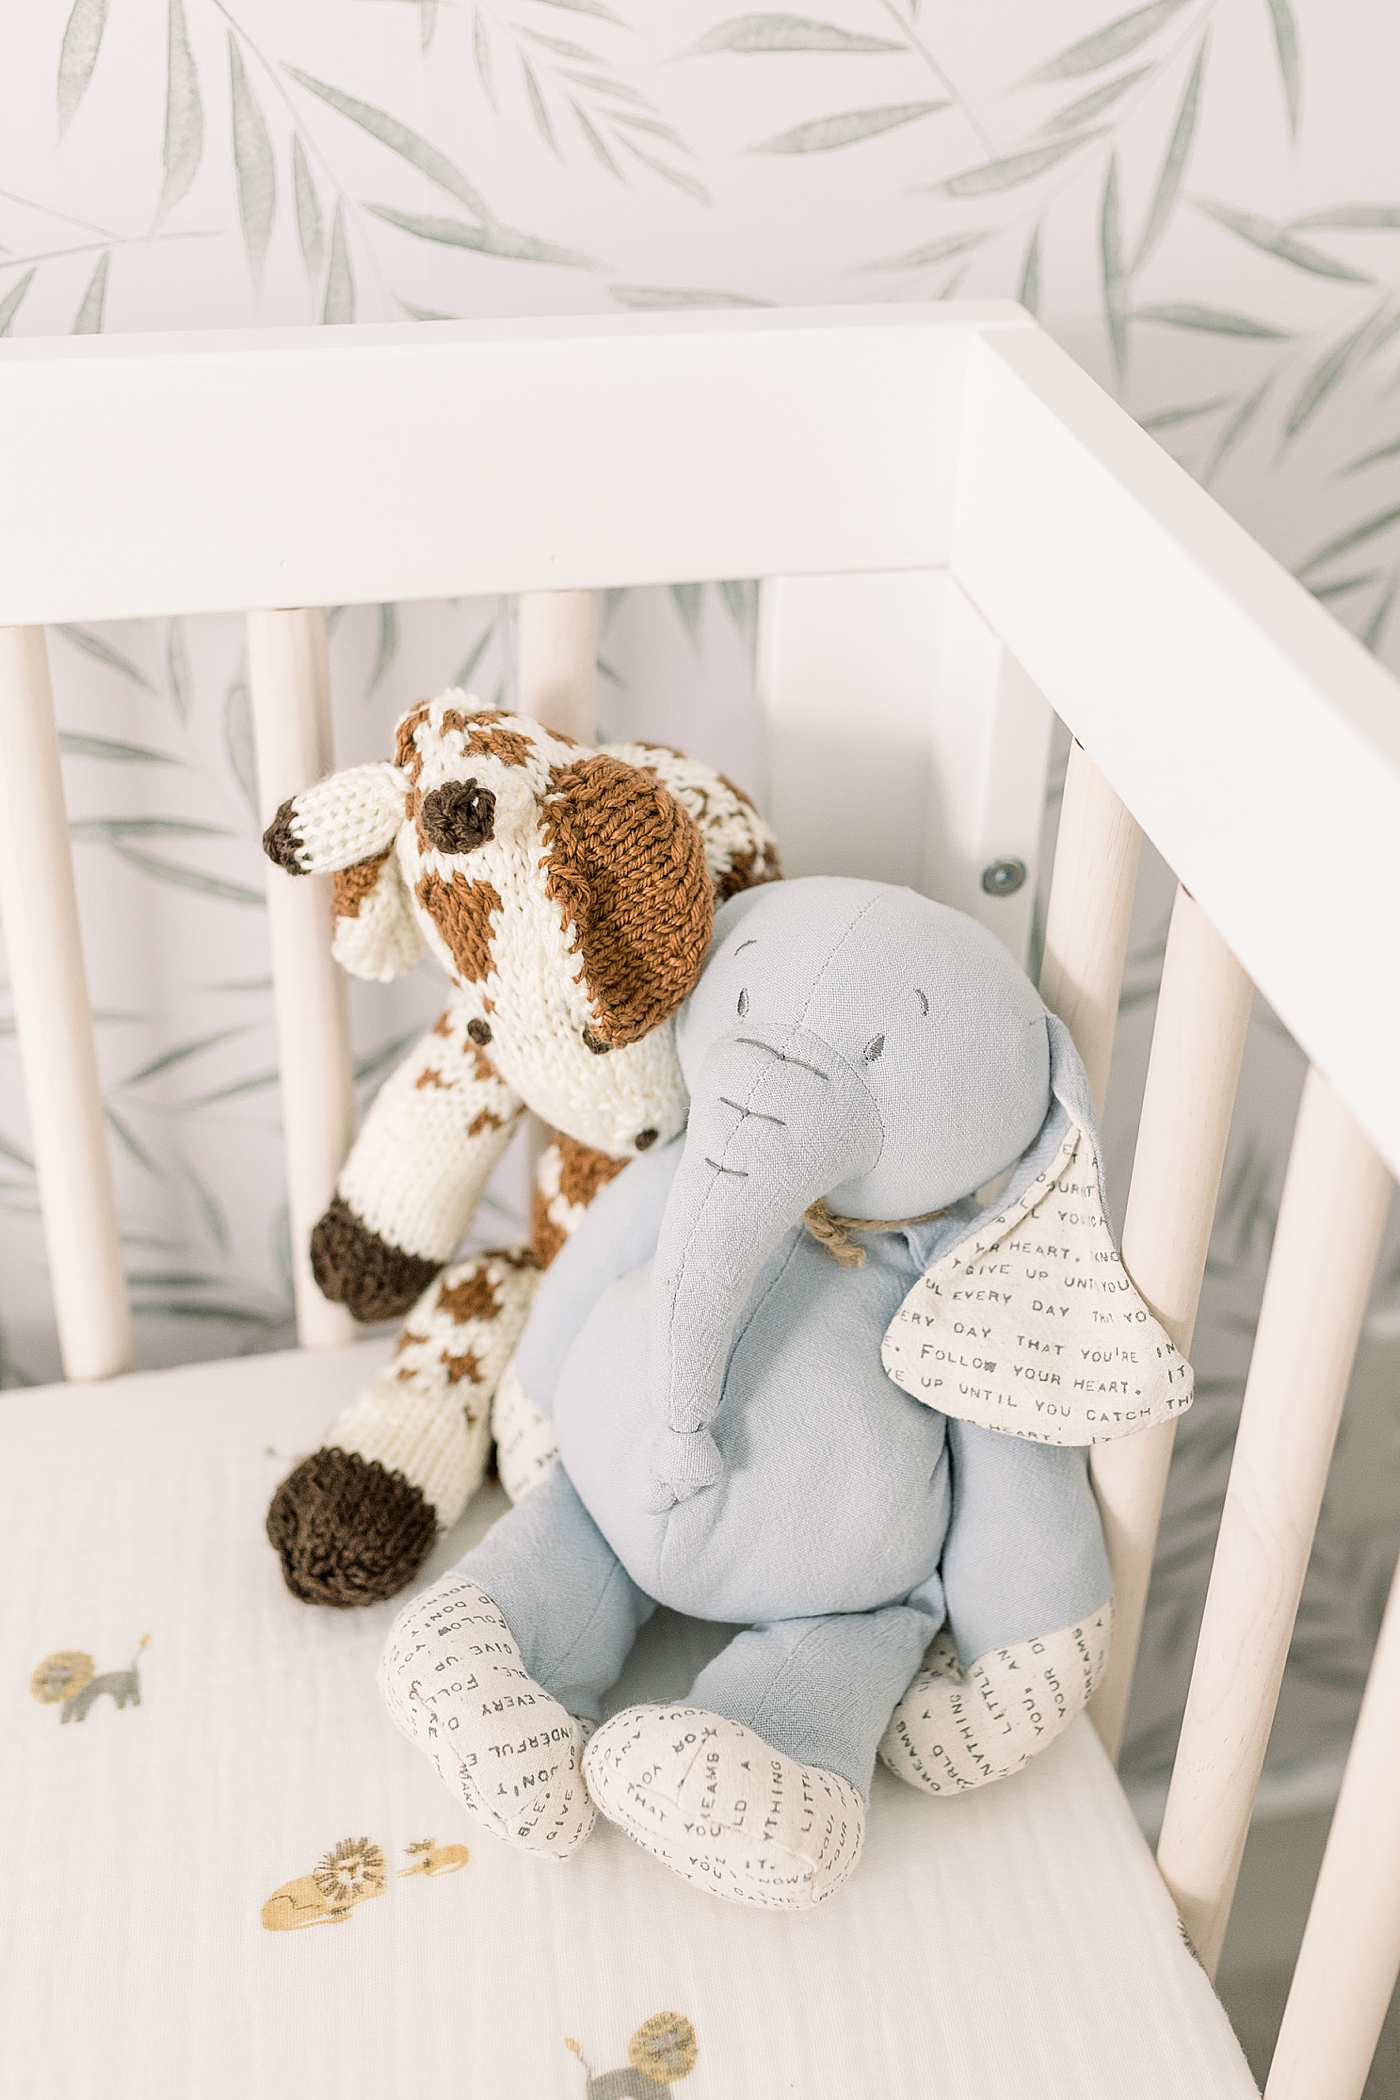 Lovies in the corner of a baby's crib | Photo by Caitlyn Motycka Photography